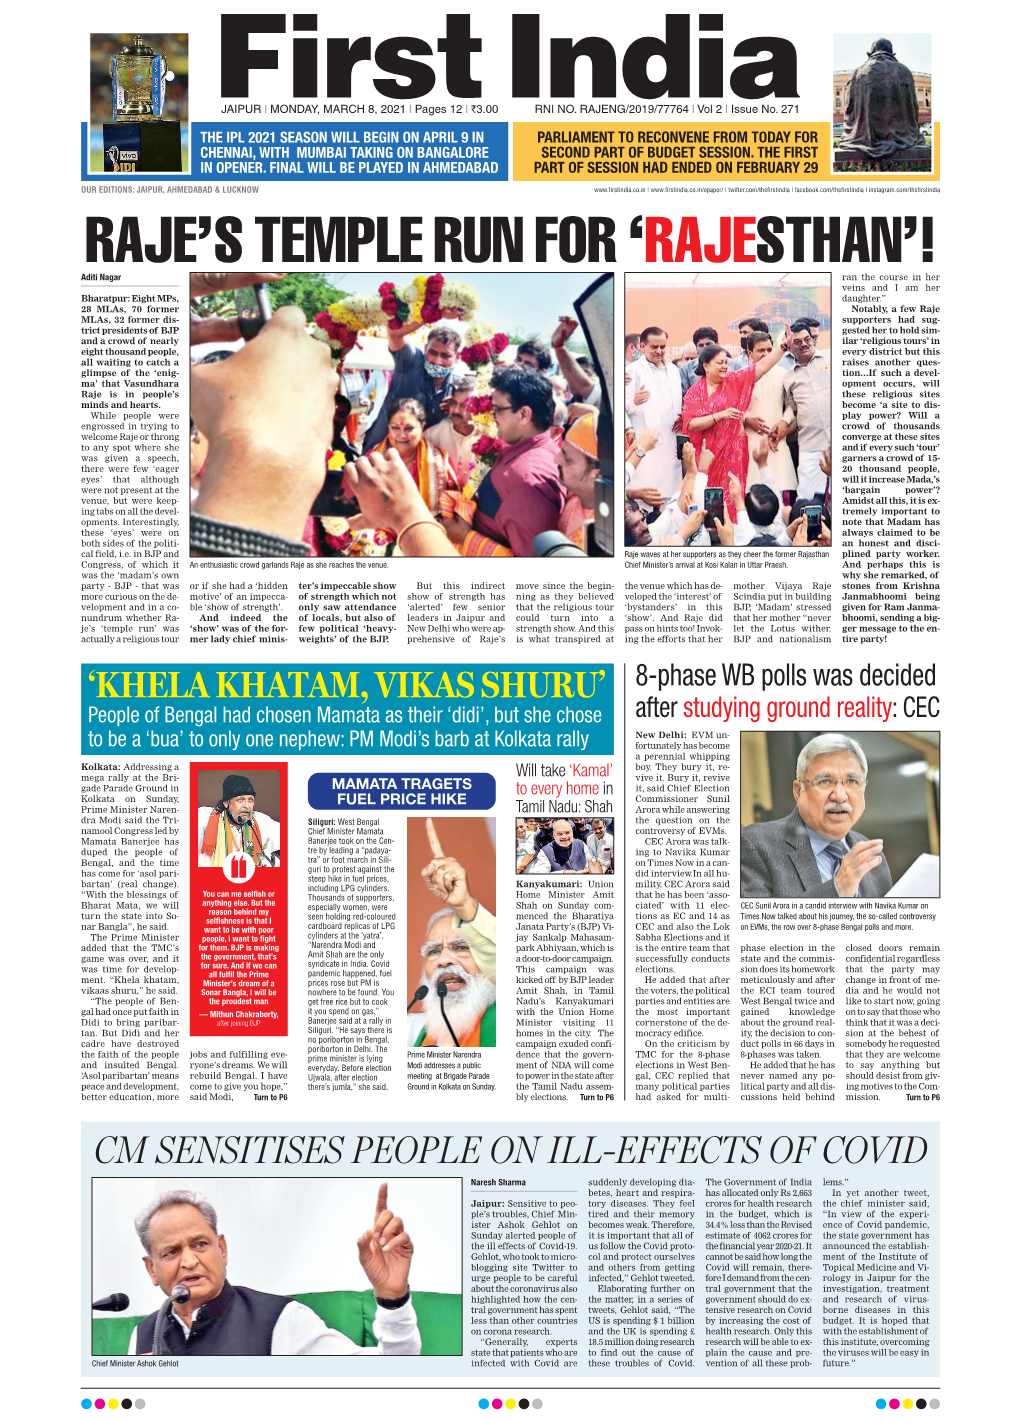 Raje's Temple Run for 'Rajesthan'!